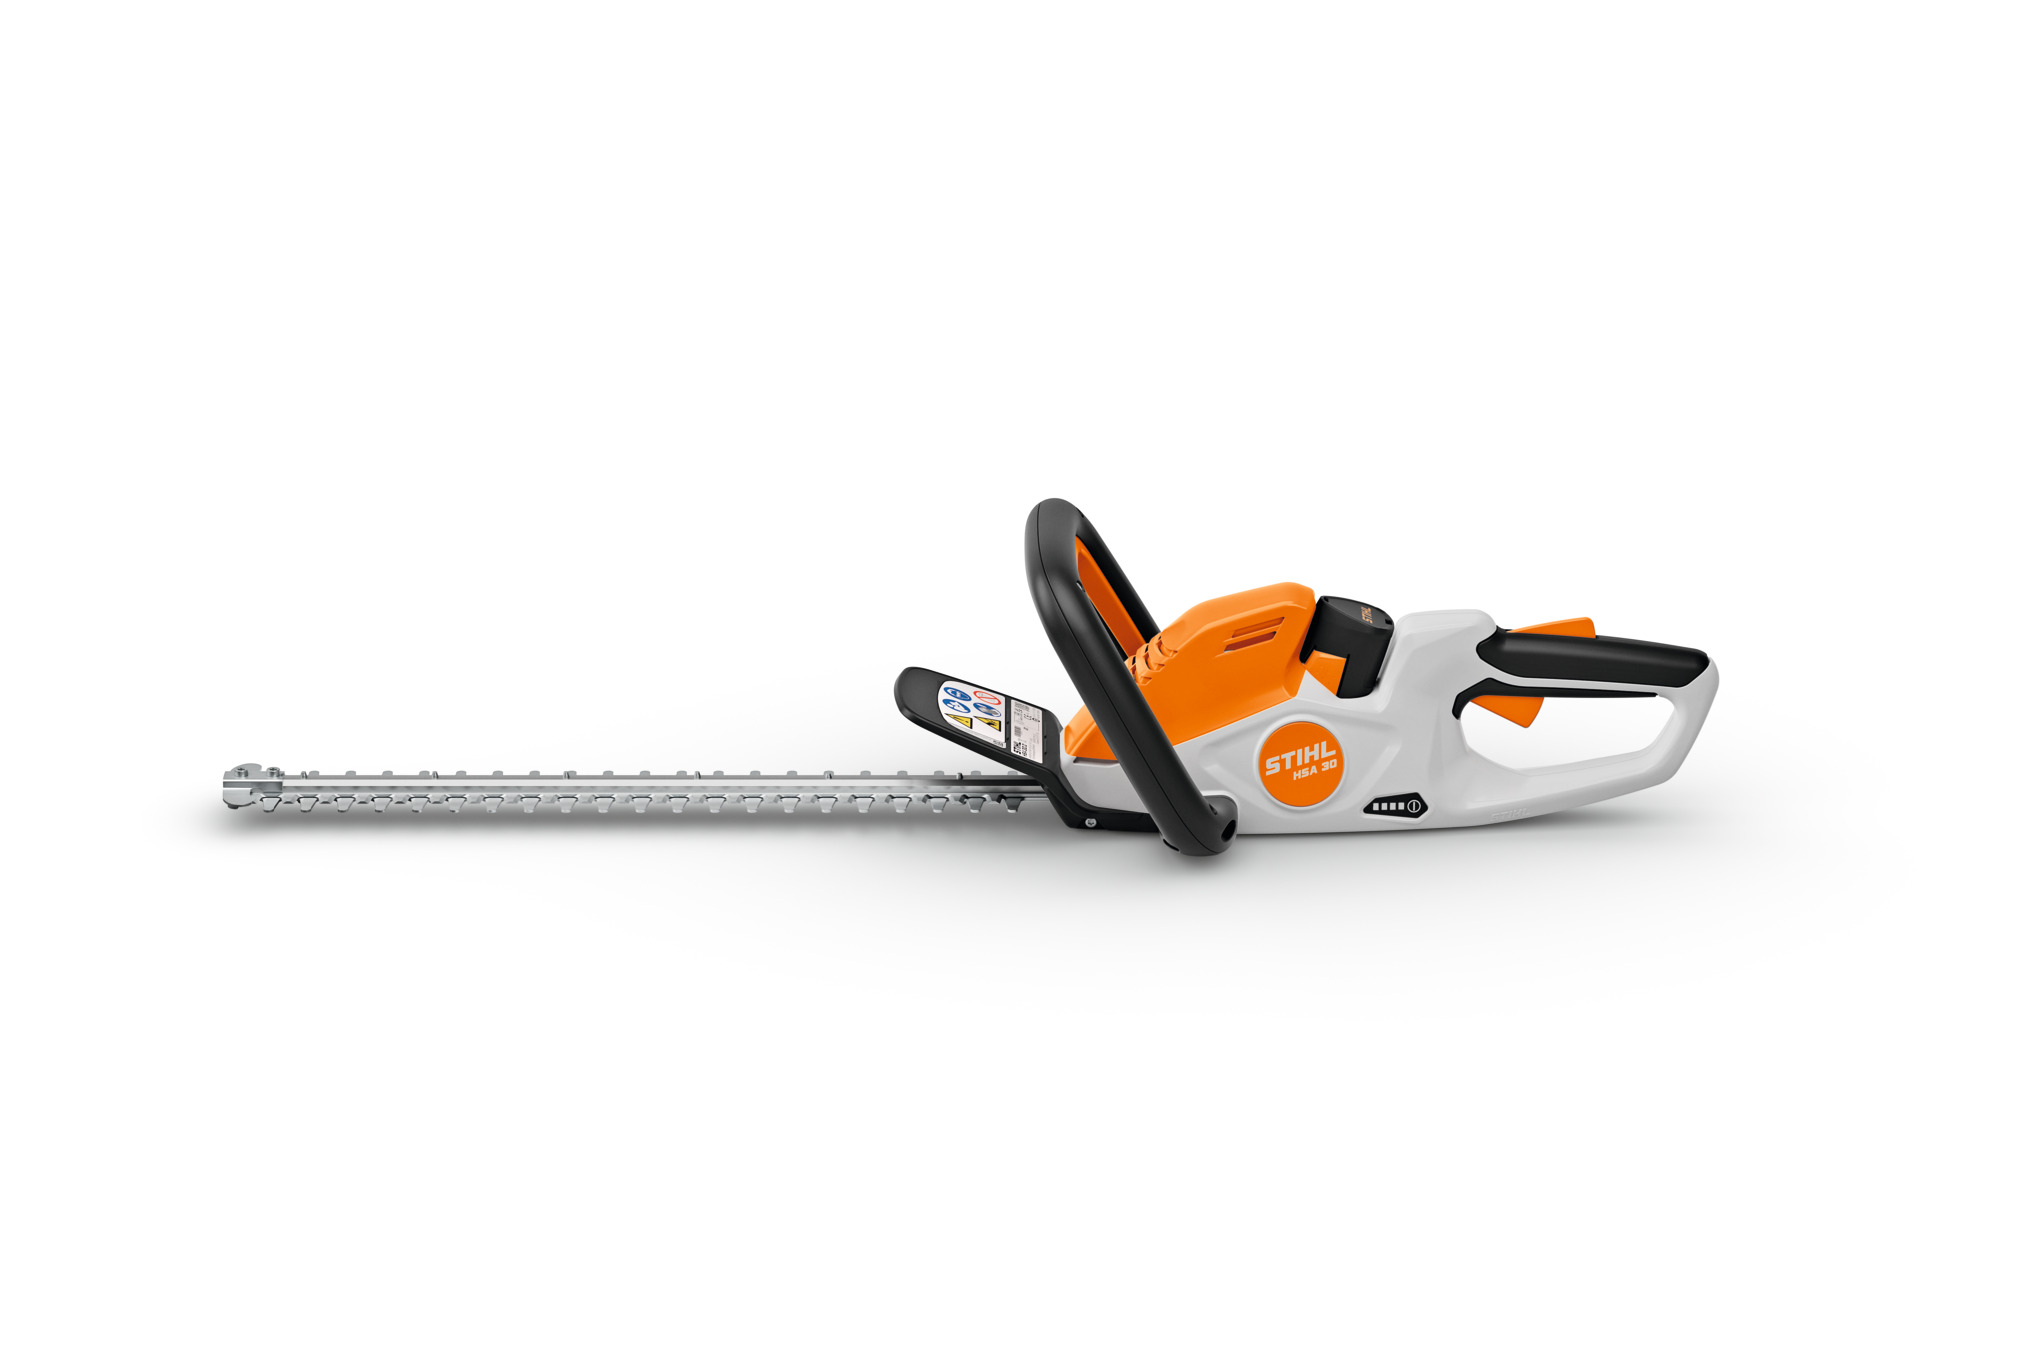 HSA 30 Cordless Hedge Trimmer